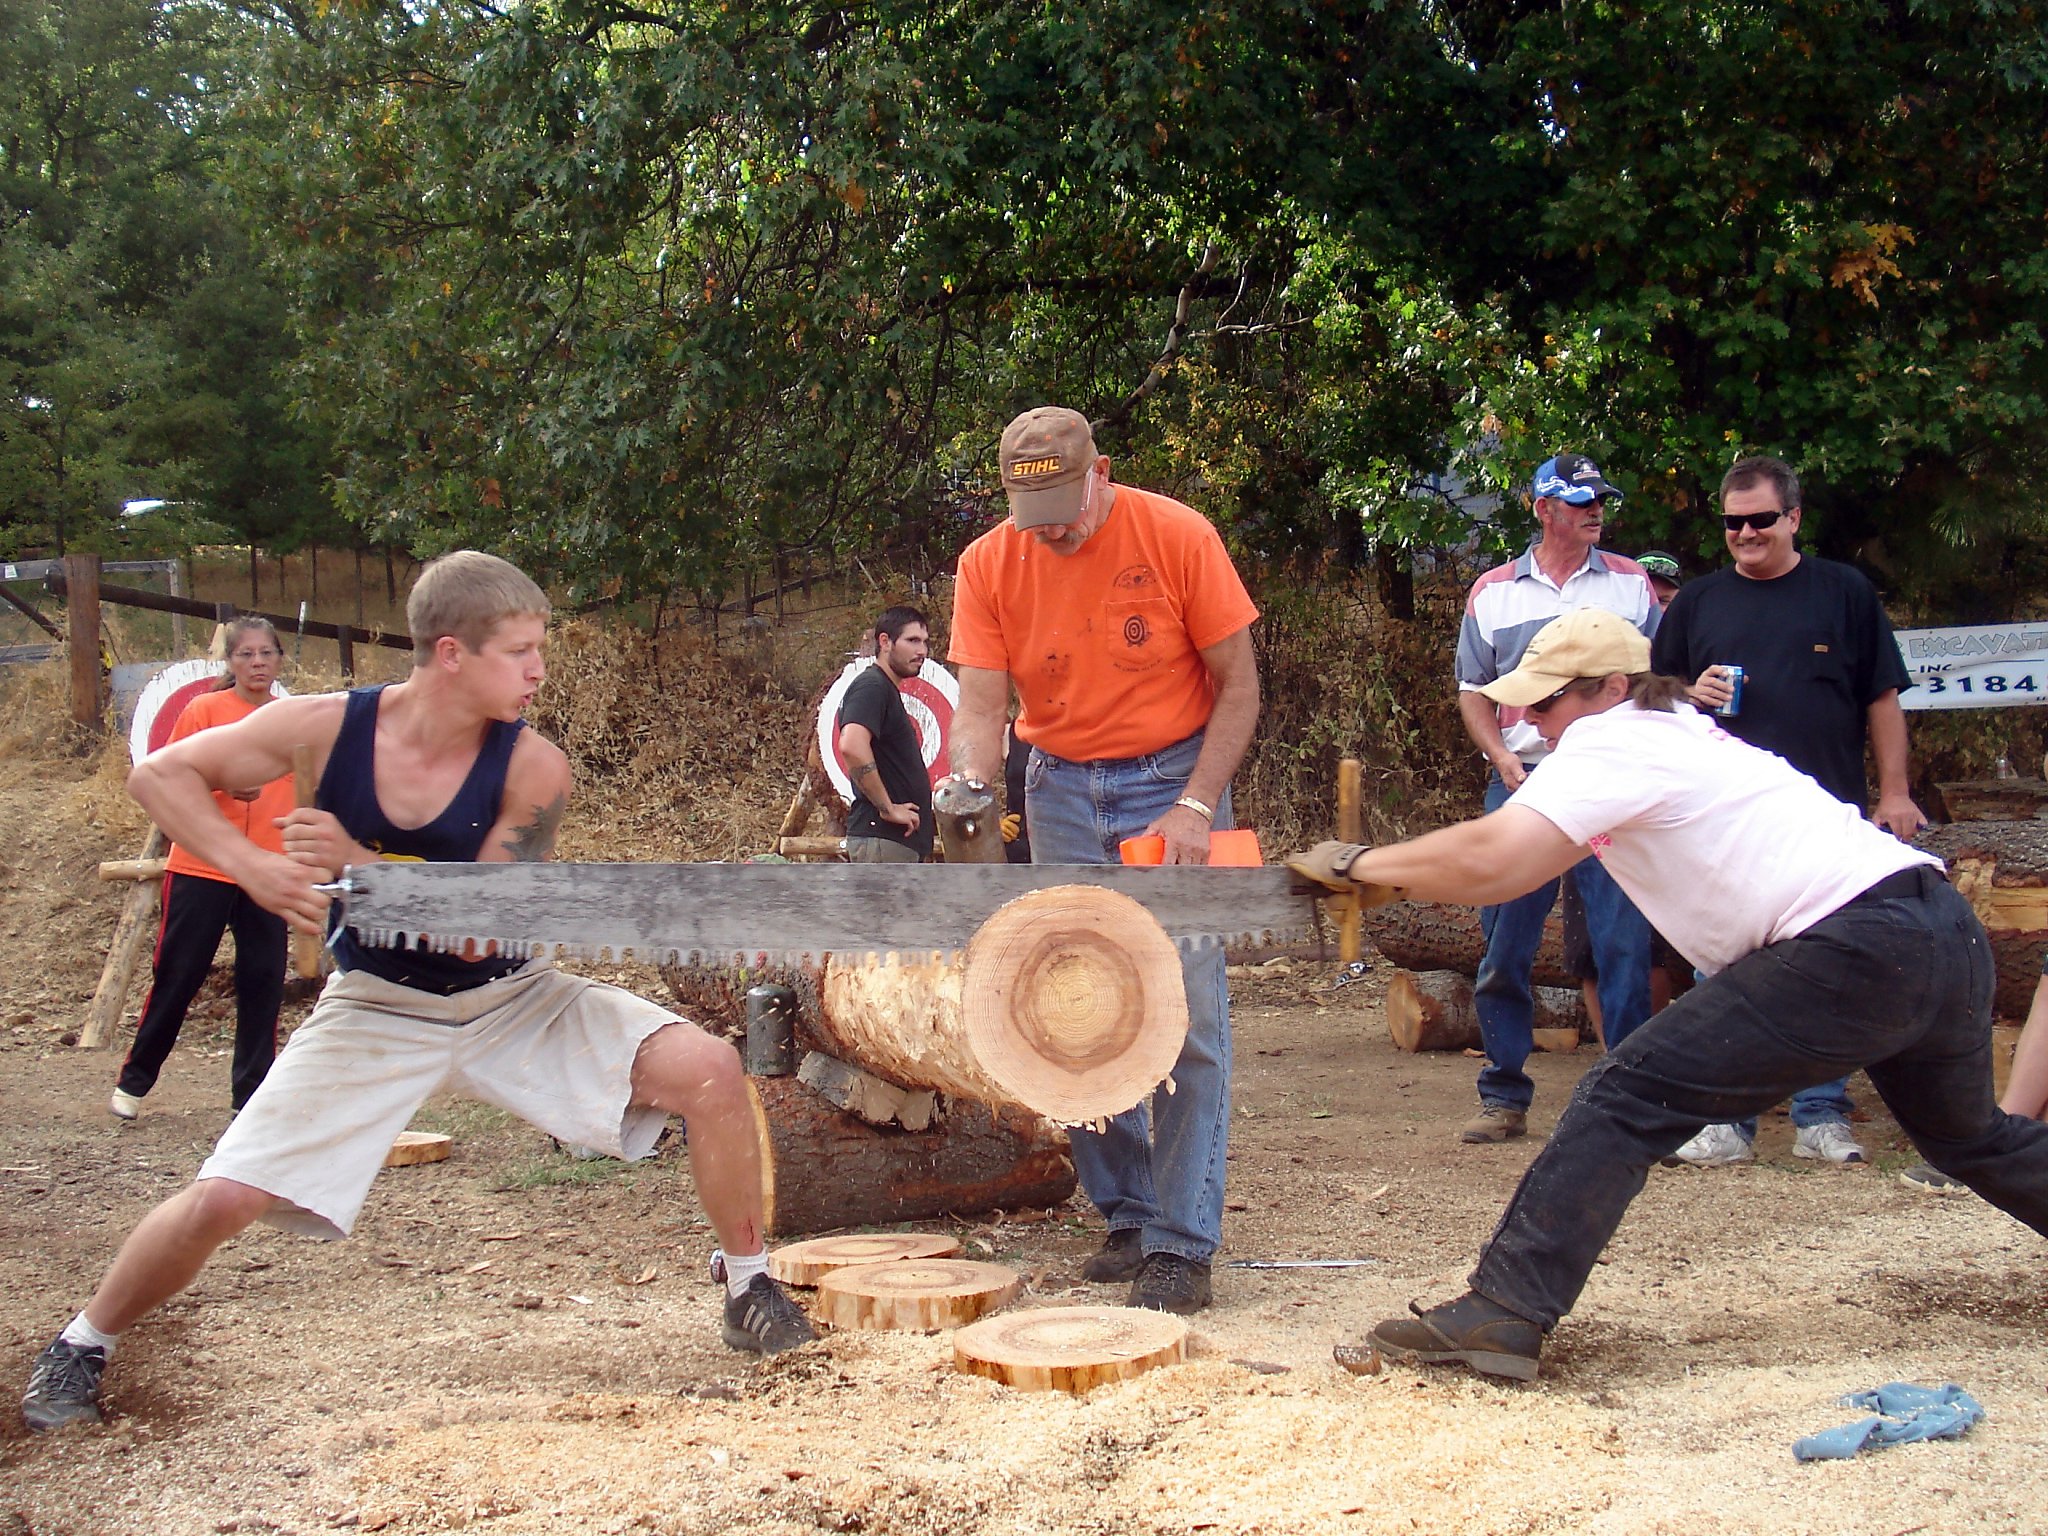 Calaveras oiling up chain saws for Lumberjack Day - SFGate